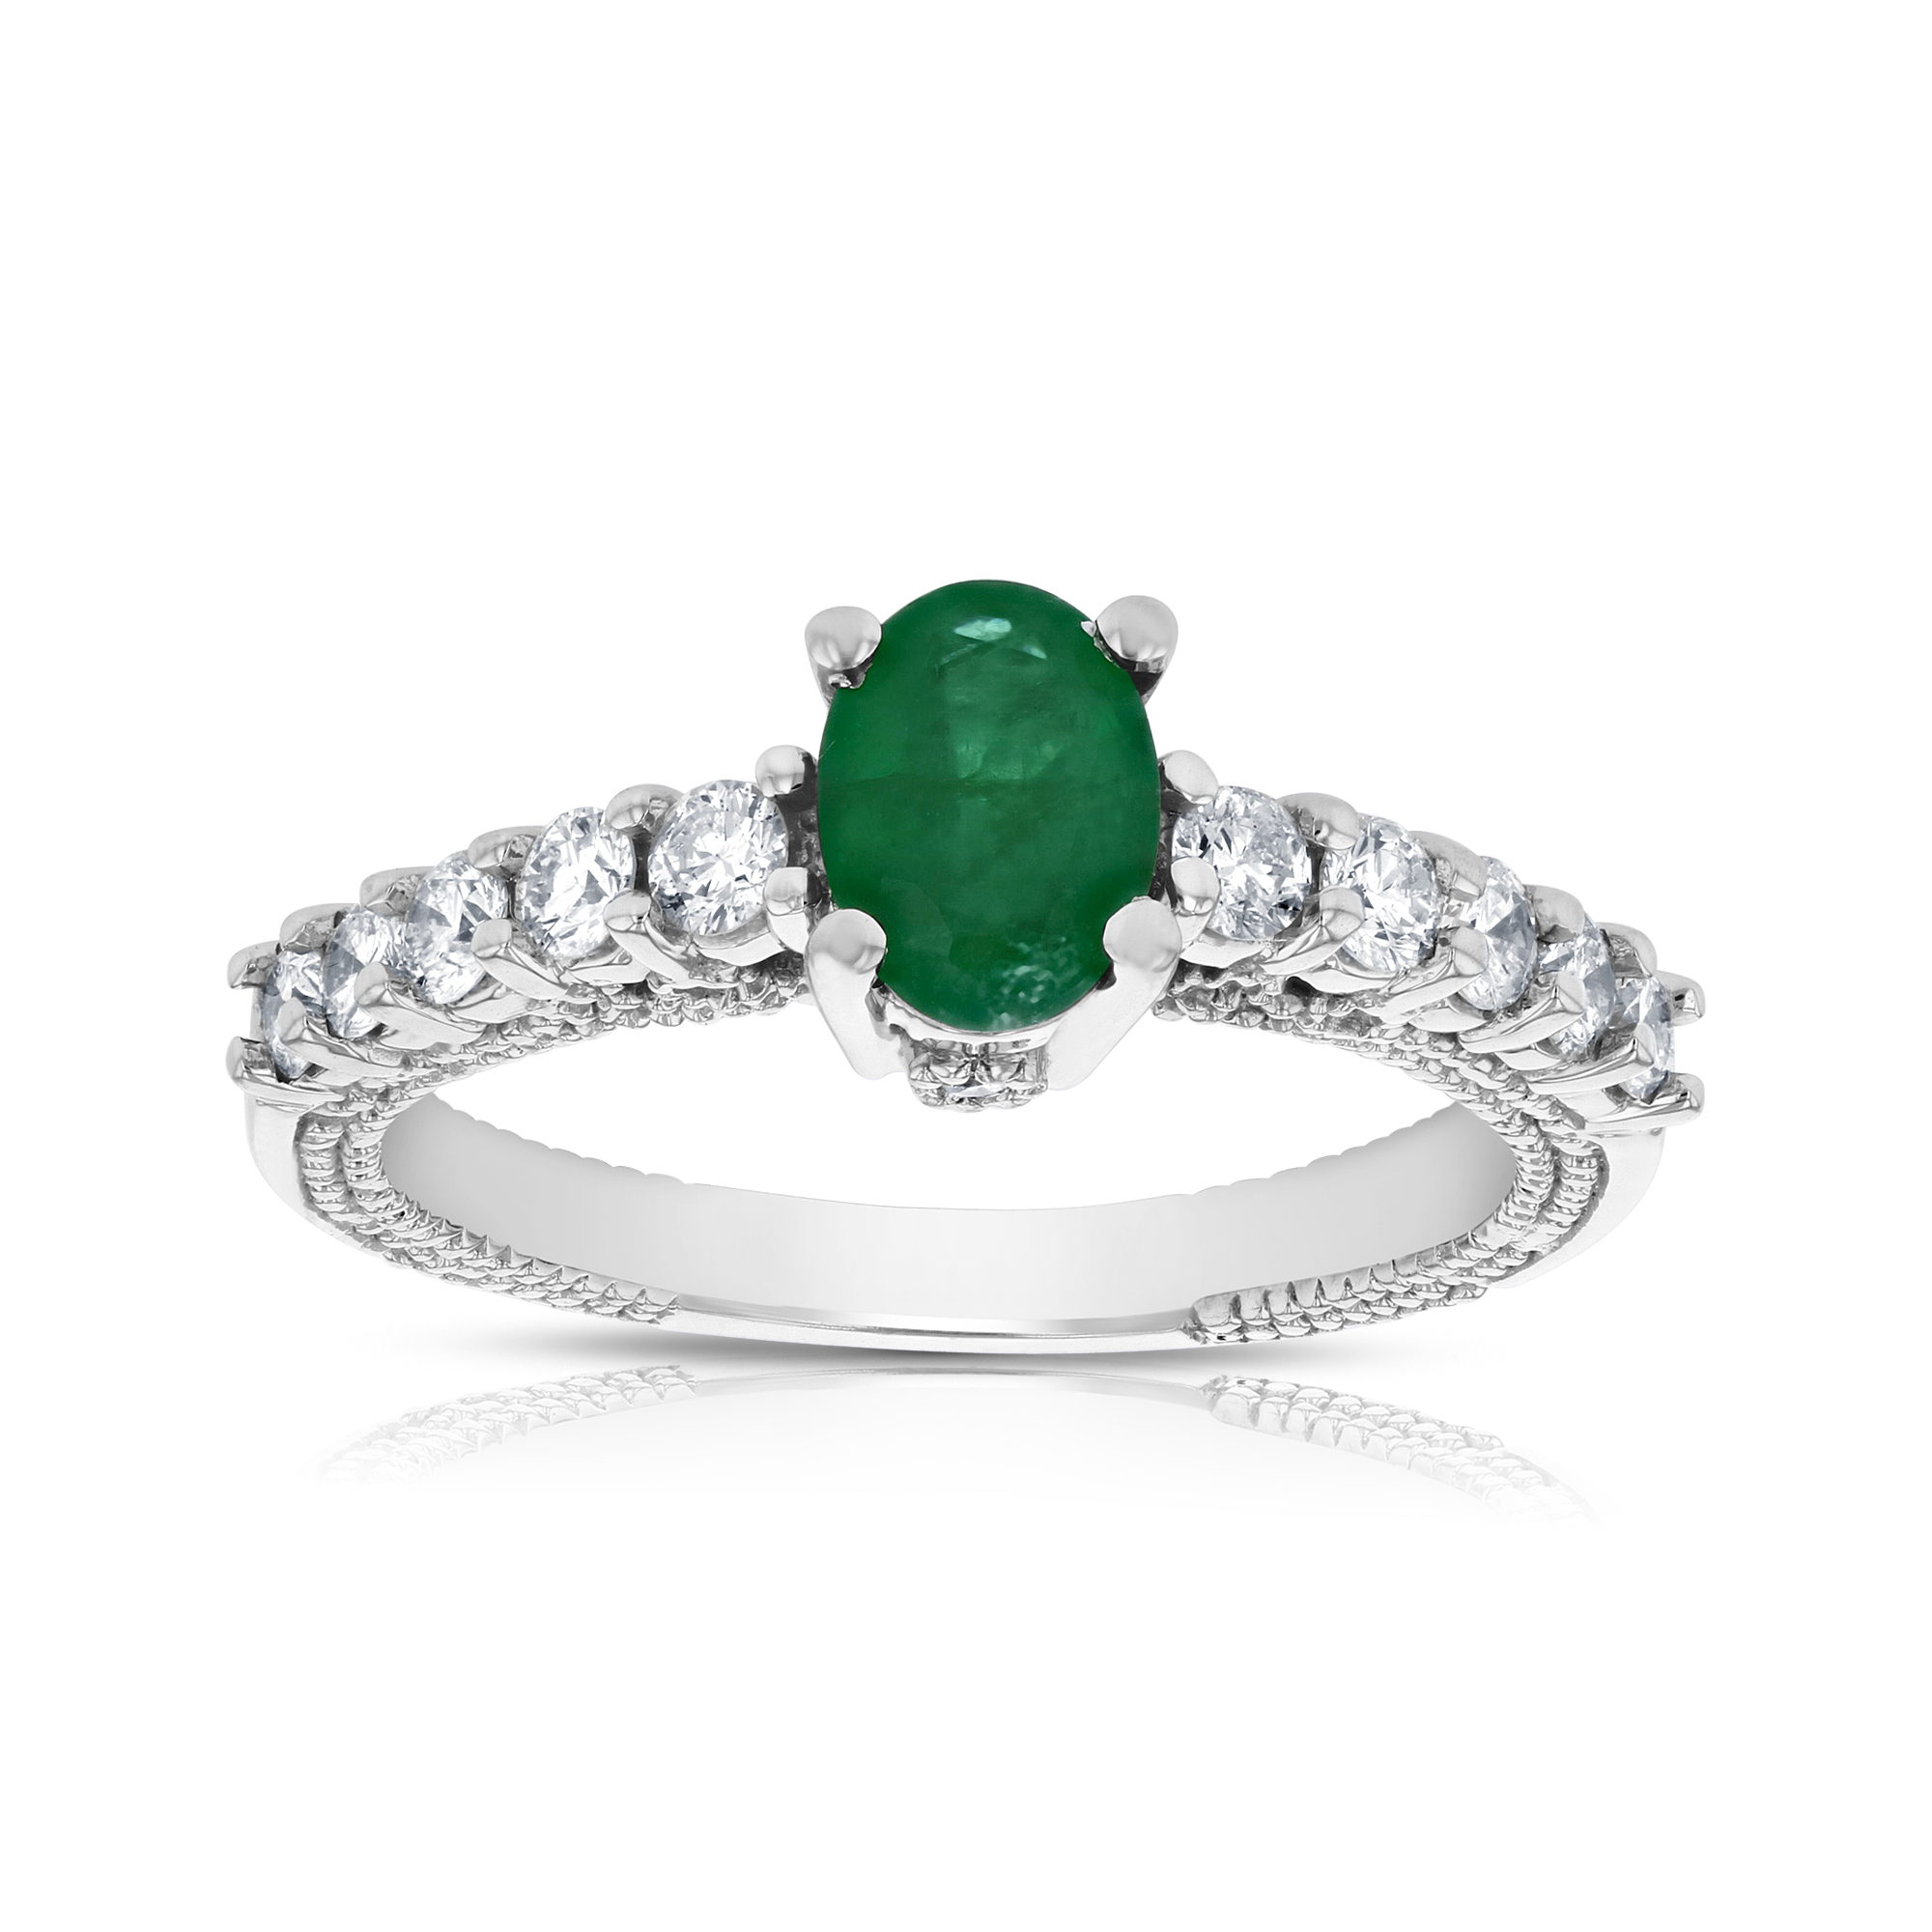 View 0.51ctw Diamond and Emerald Ring in 14k Yellow Gold